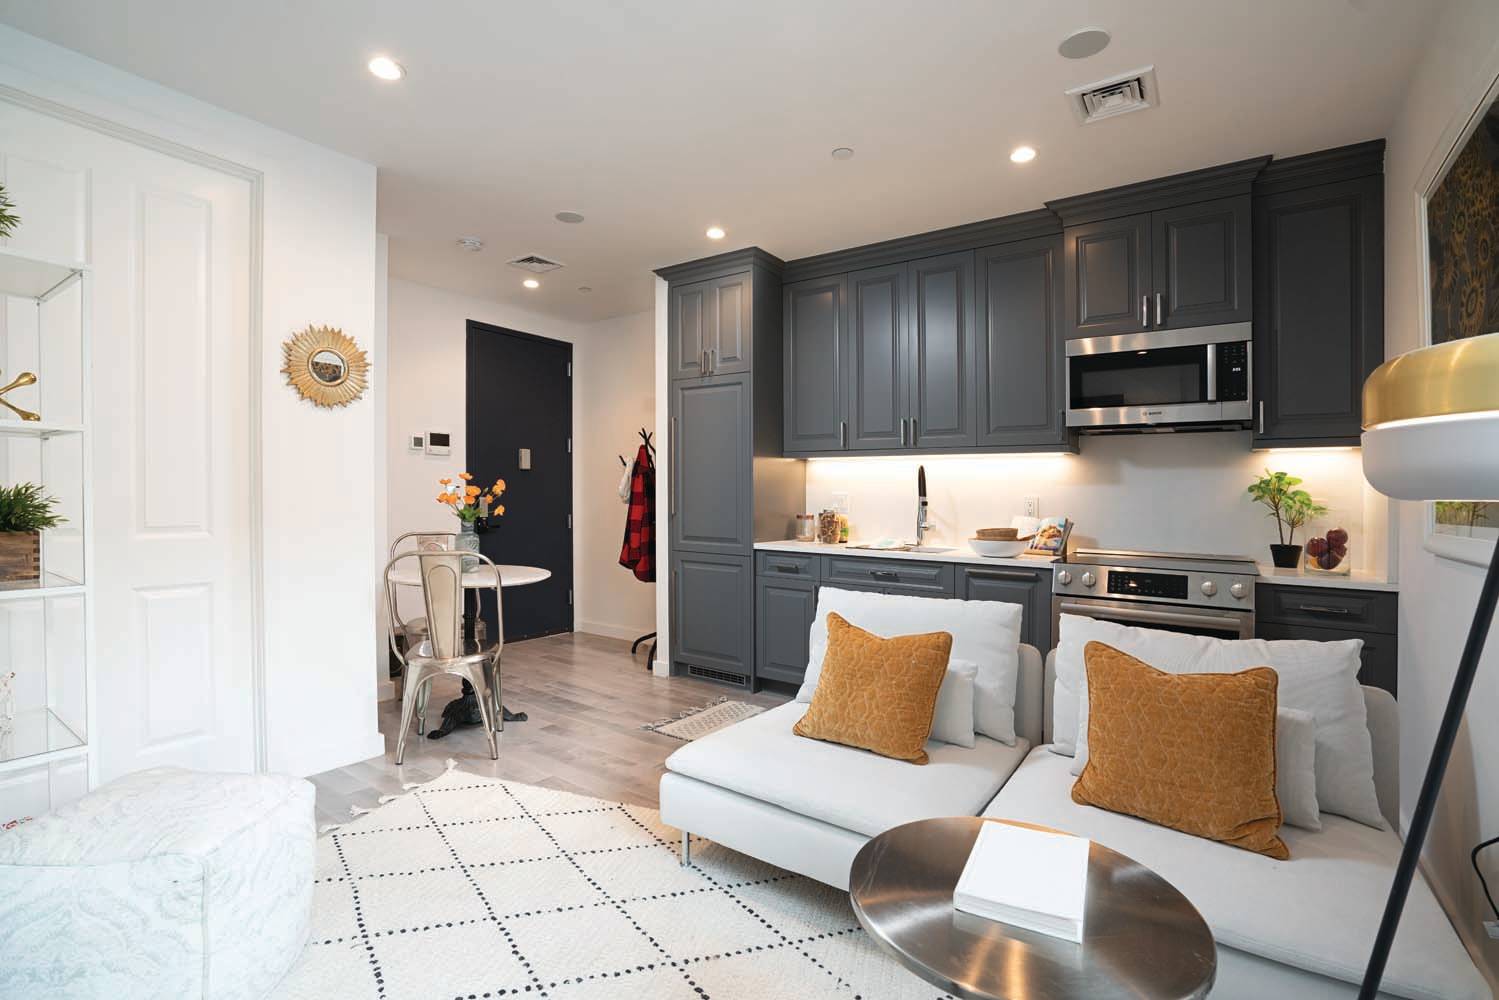 Welcome to 81 McGuinness A collection of 8 condo residences in the heart of Greenpoint, Brooklyn This STUDIO DUPLEX has a beautiful kitchen with Bosch and Fisher amp ; Paykel ...